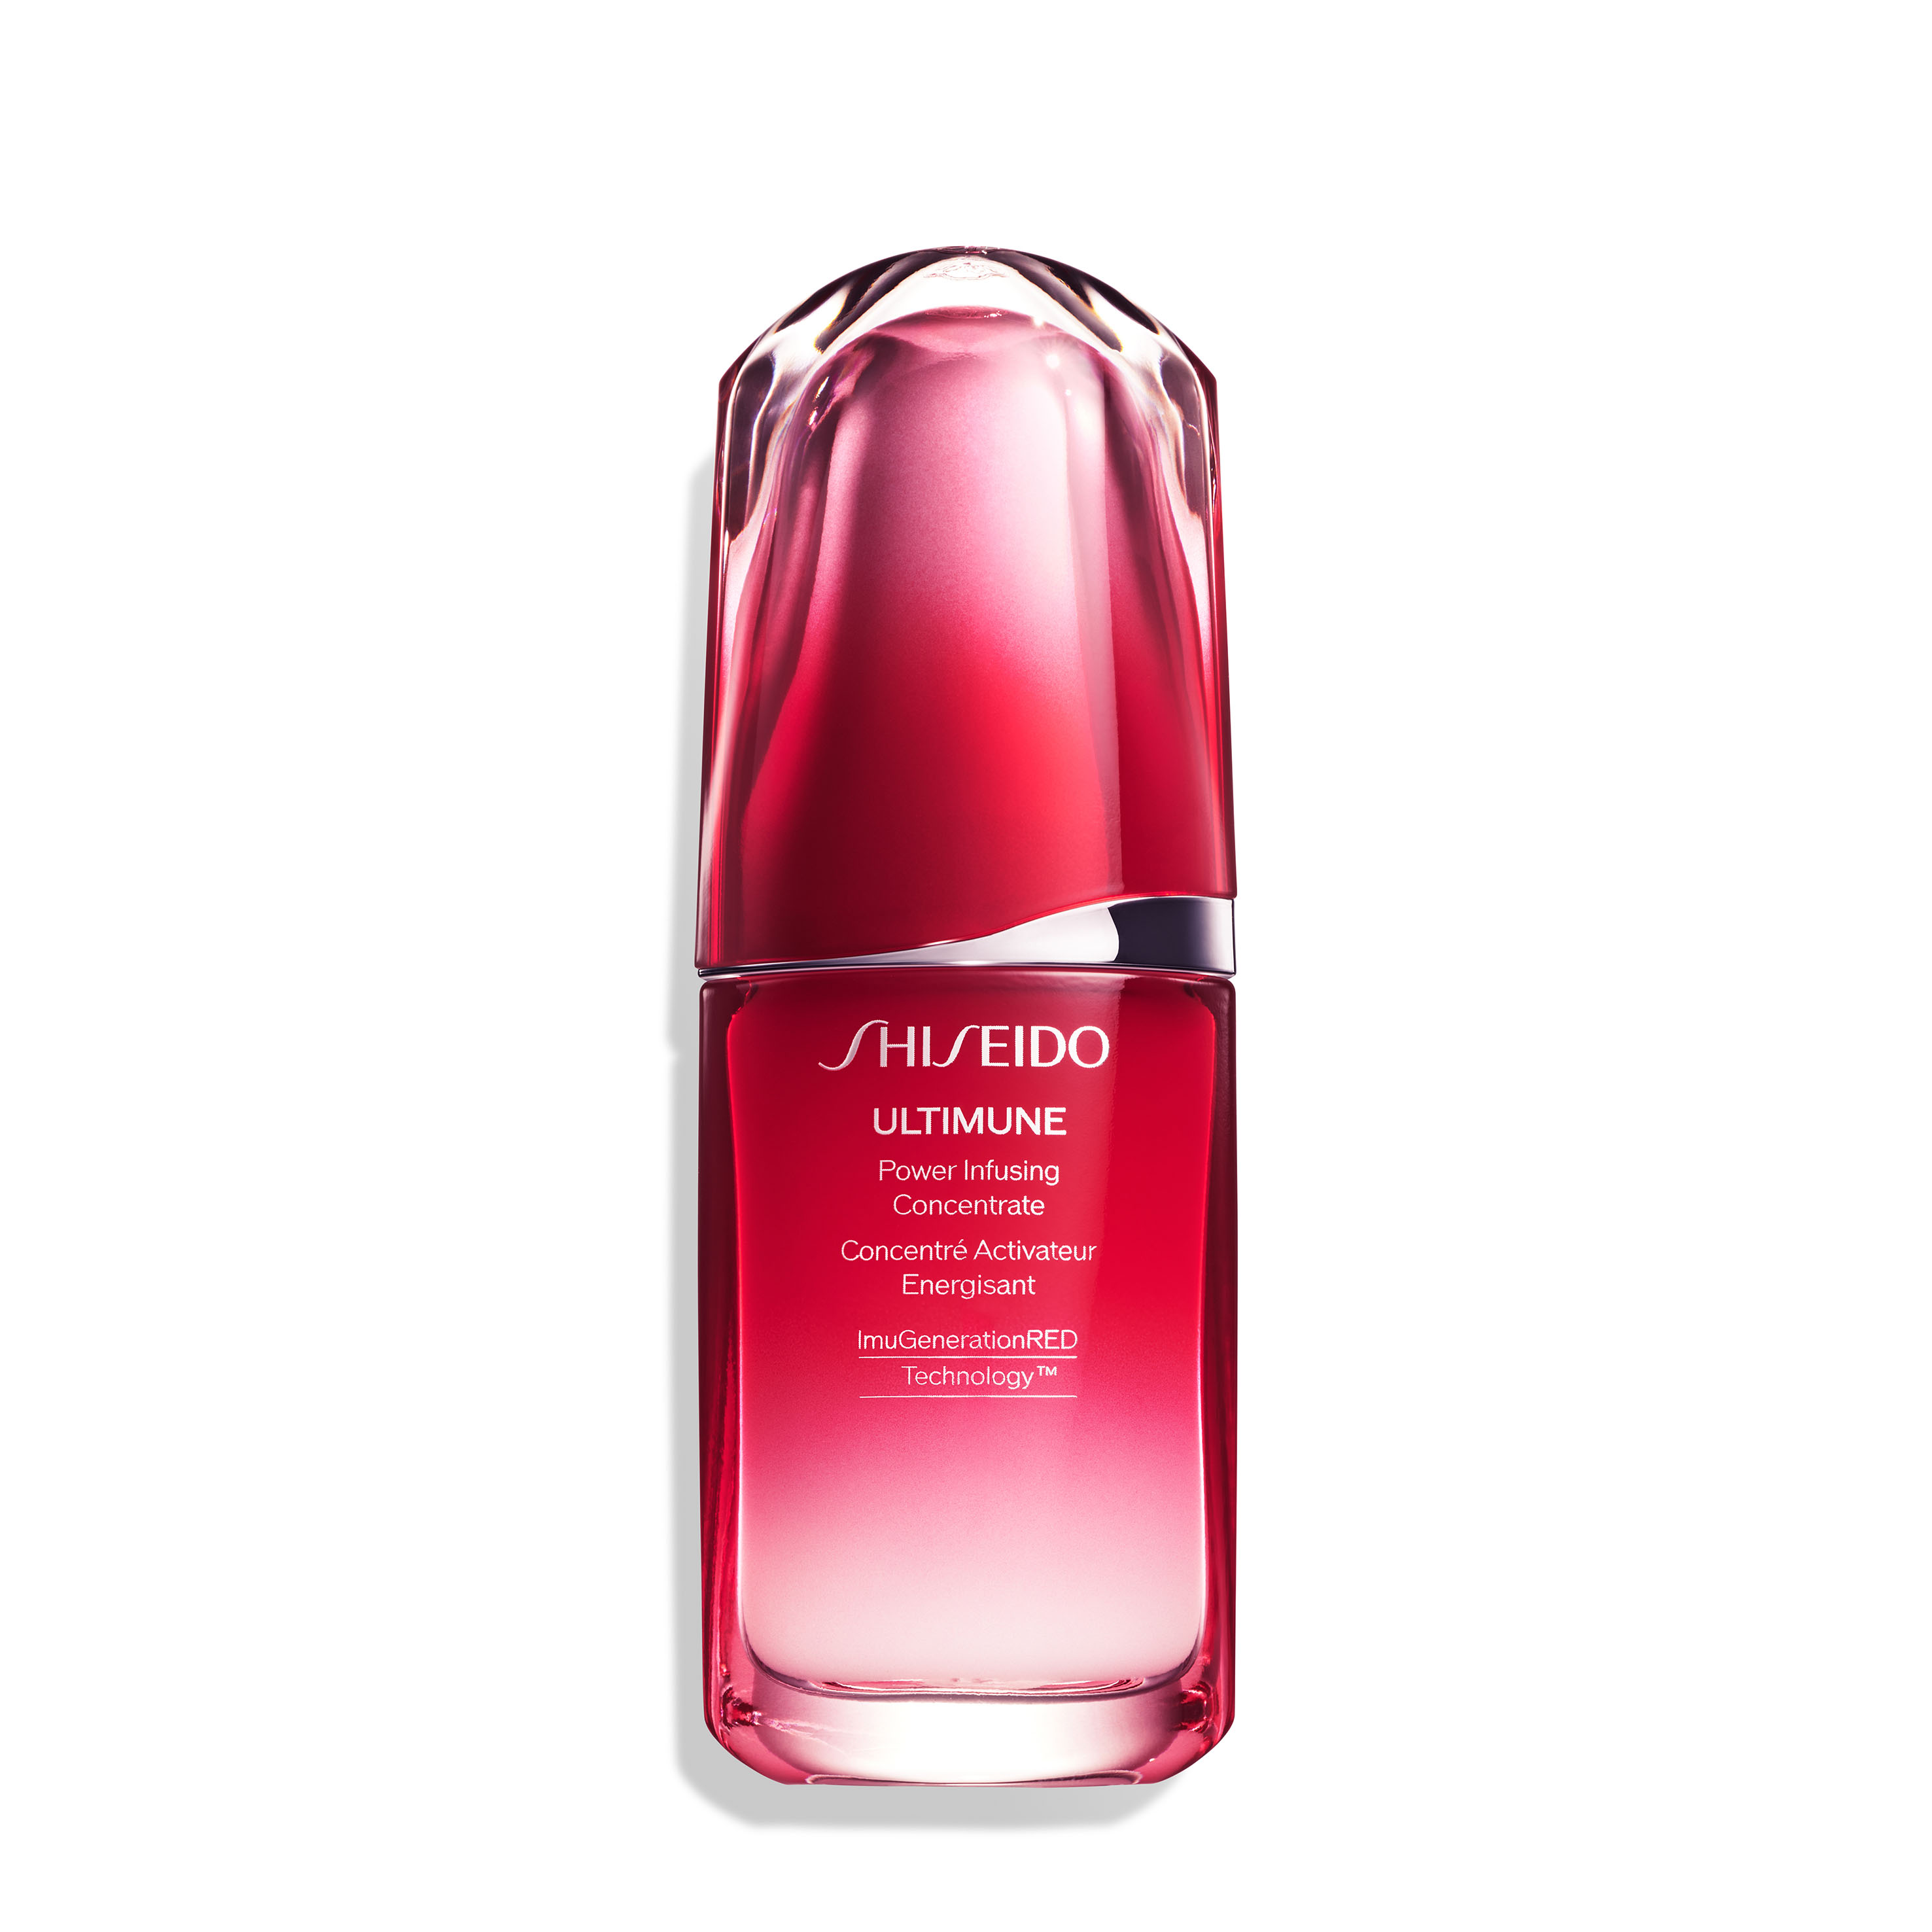 © Shiseido Ultimune Power Infusing Concentrate